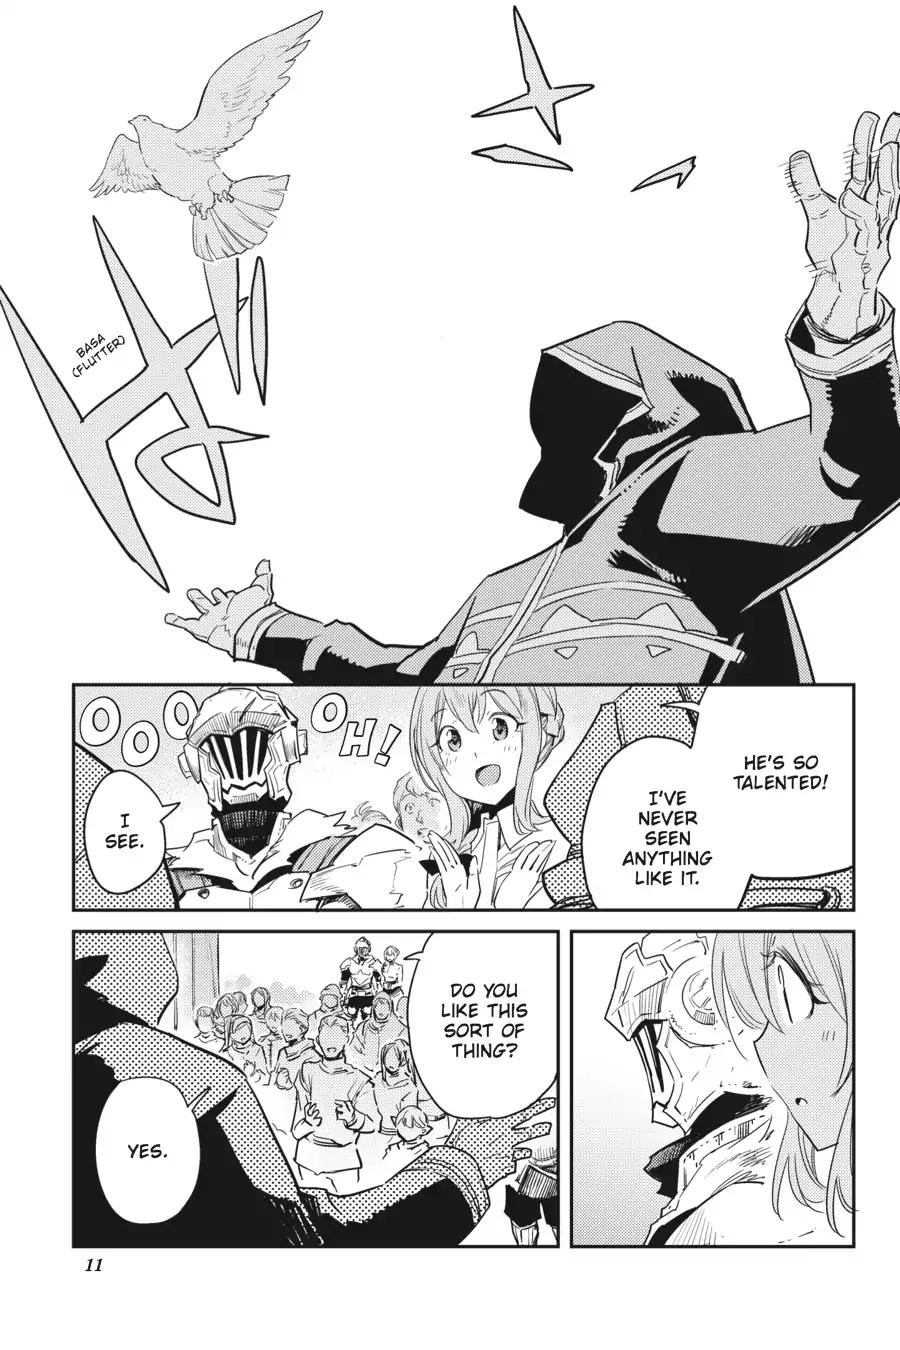 Goblin Slayer chapter 34 page 12